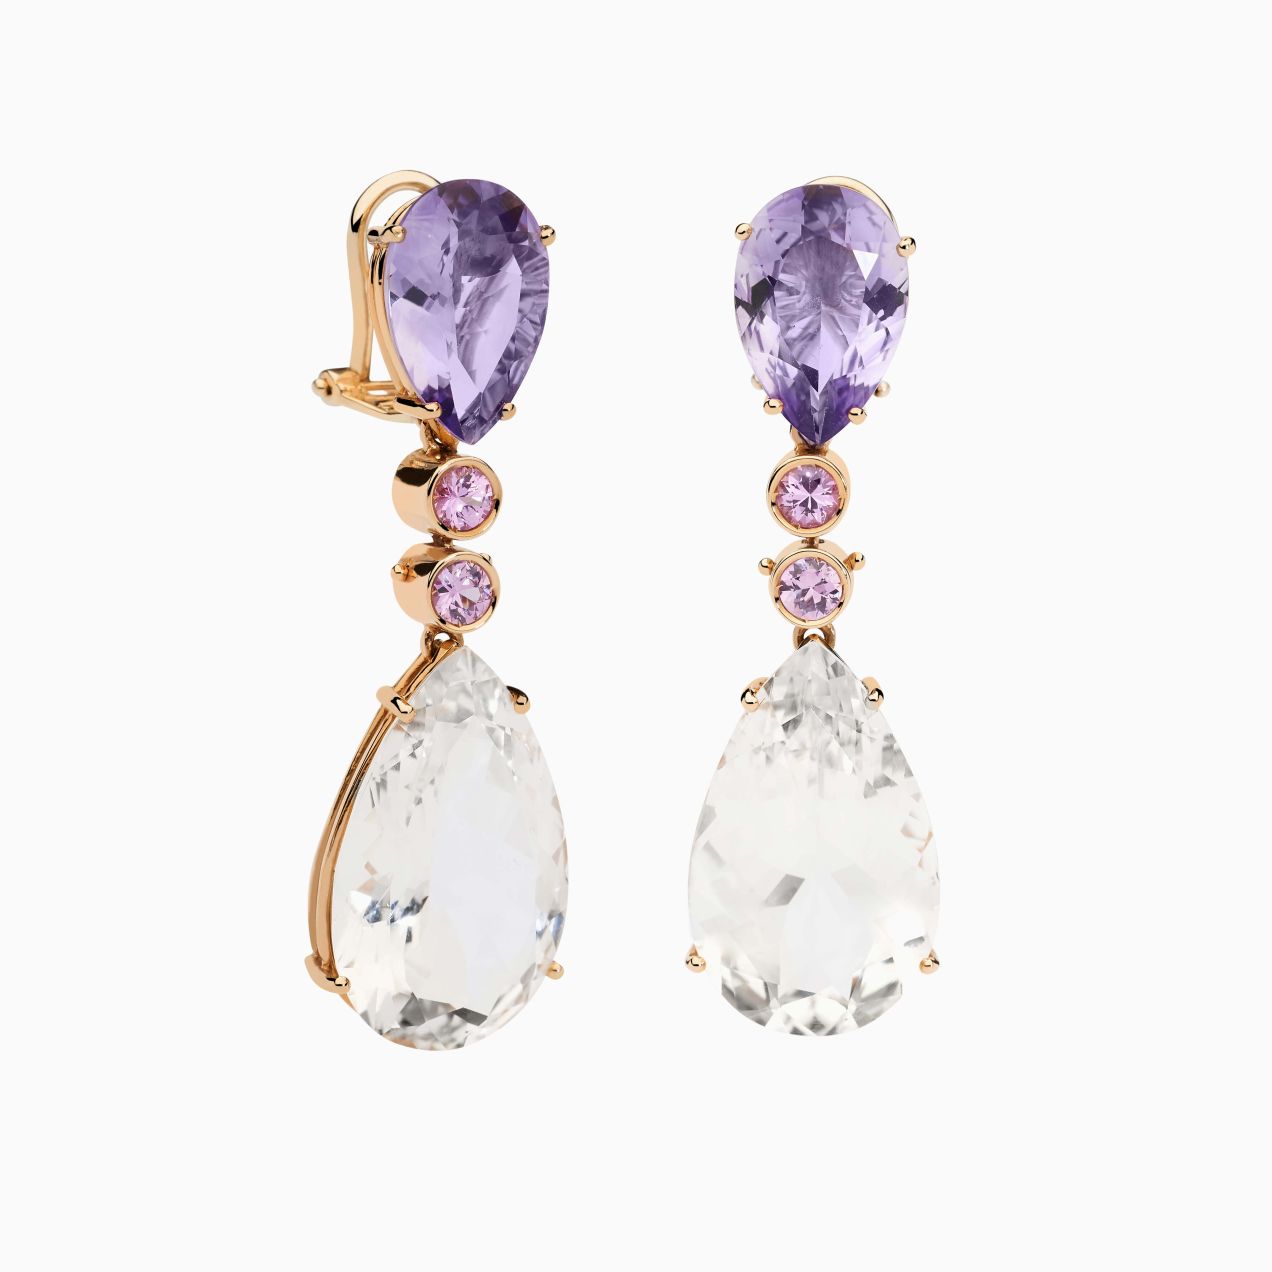 Pink gold earrings with amatistic gems, sapphires and quartz